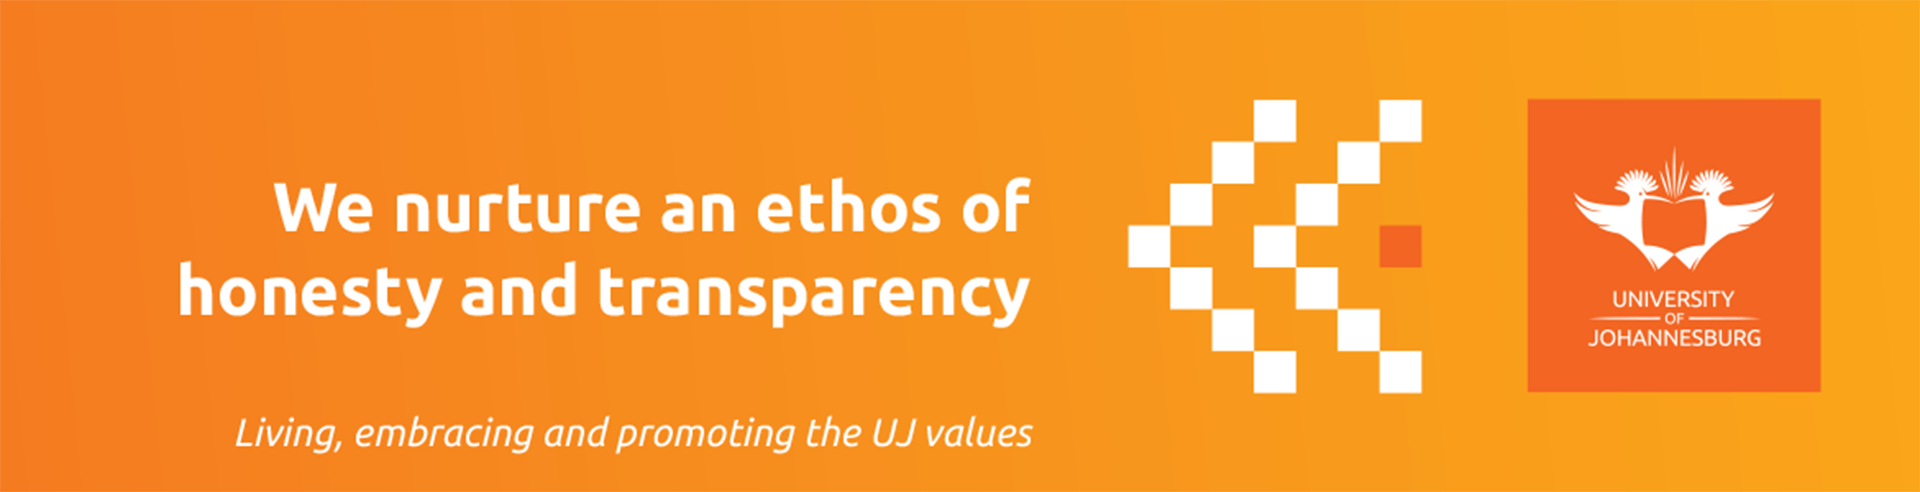 Uj Values Expressions Posters 2020 Ulink 1170x300mm 17